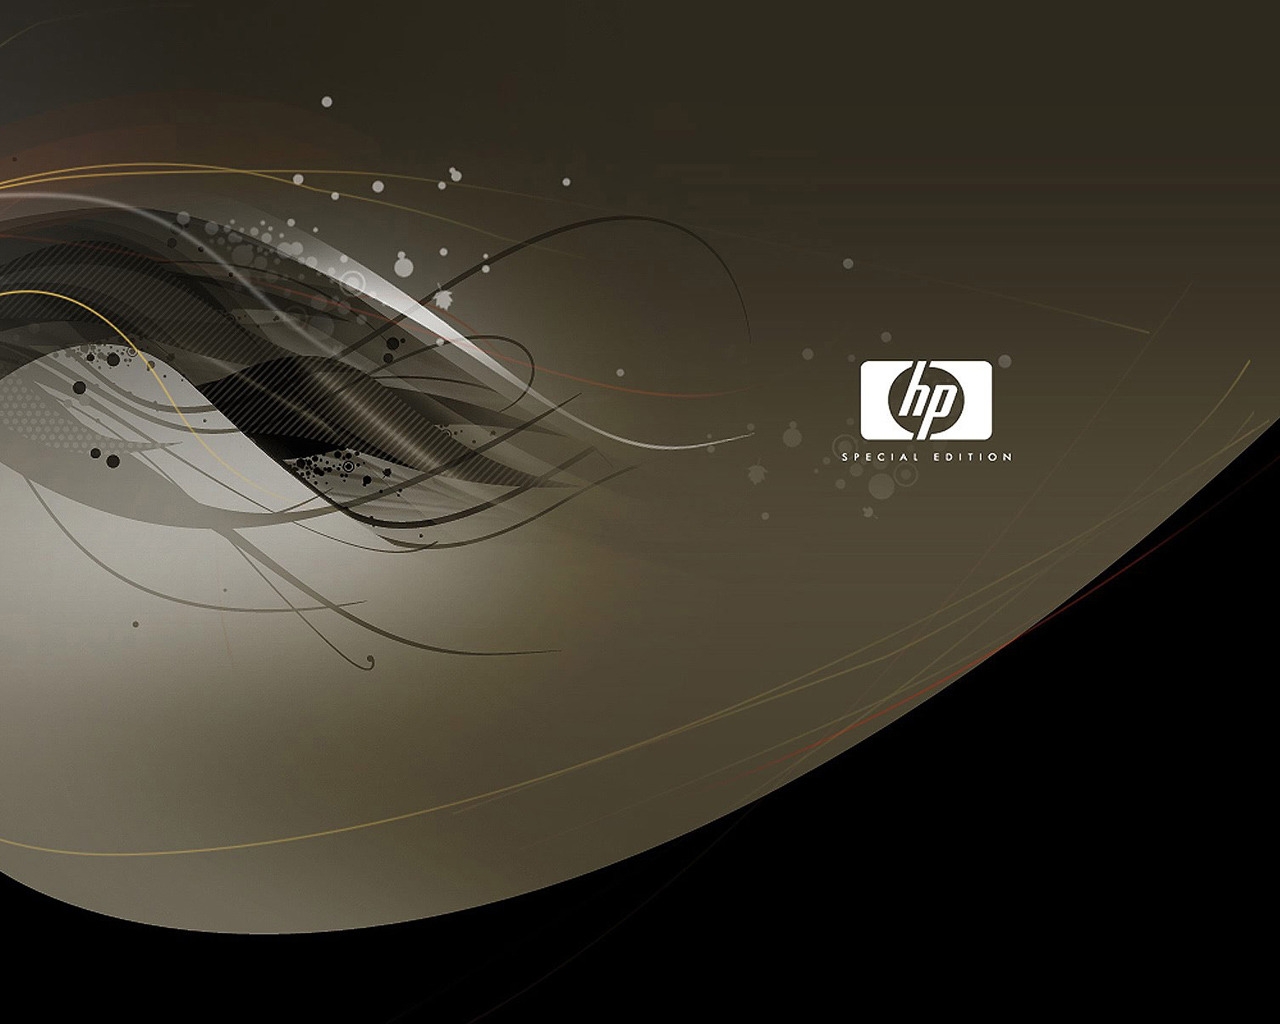 HP Special Edition for 1280 x 1024 resolution